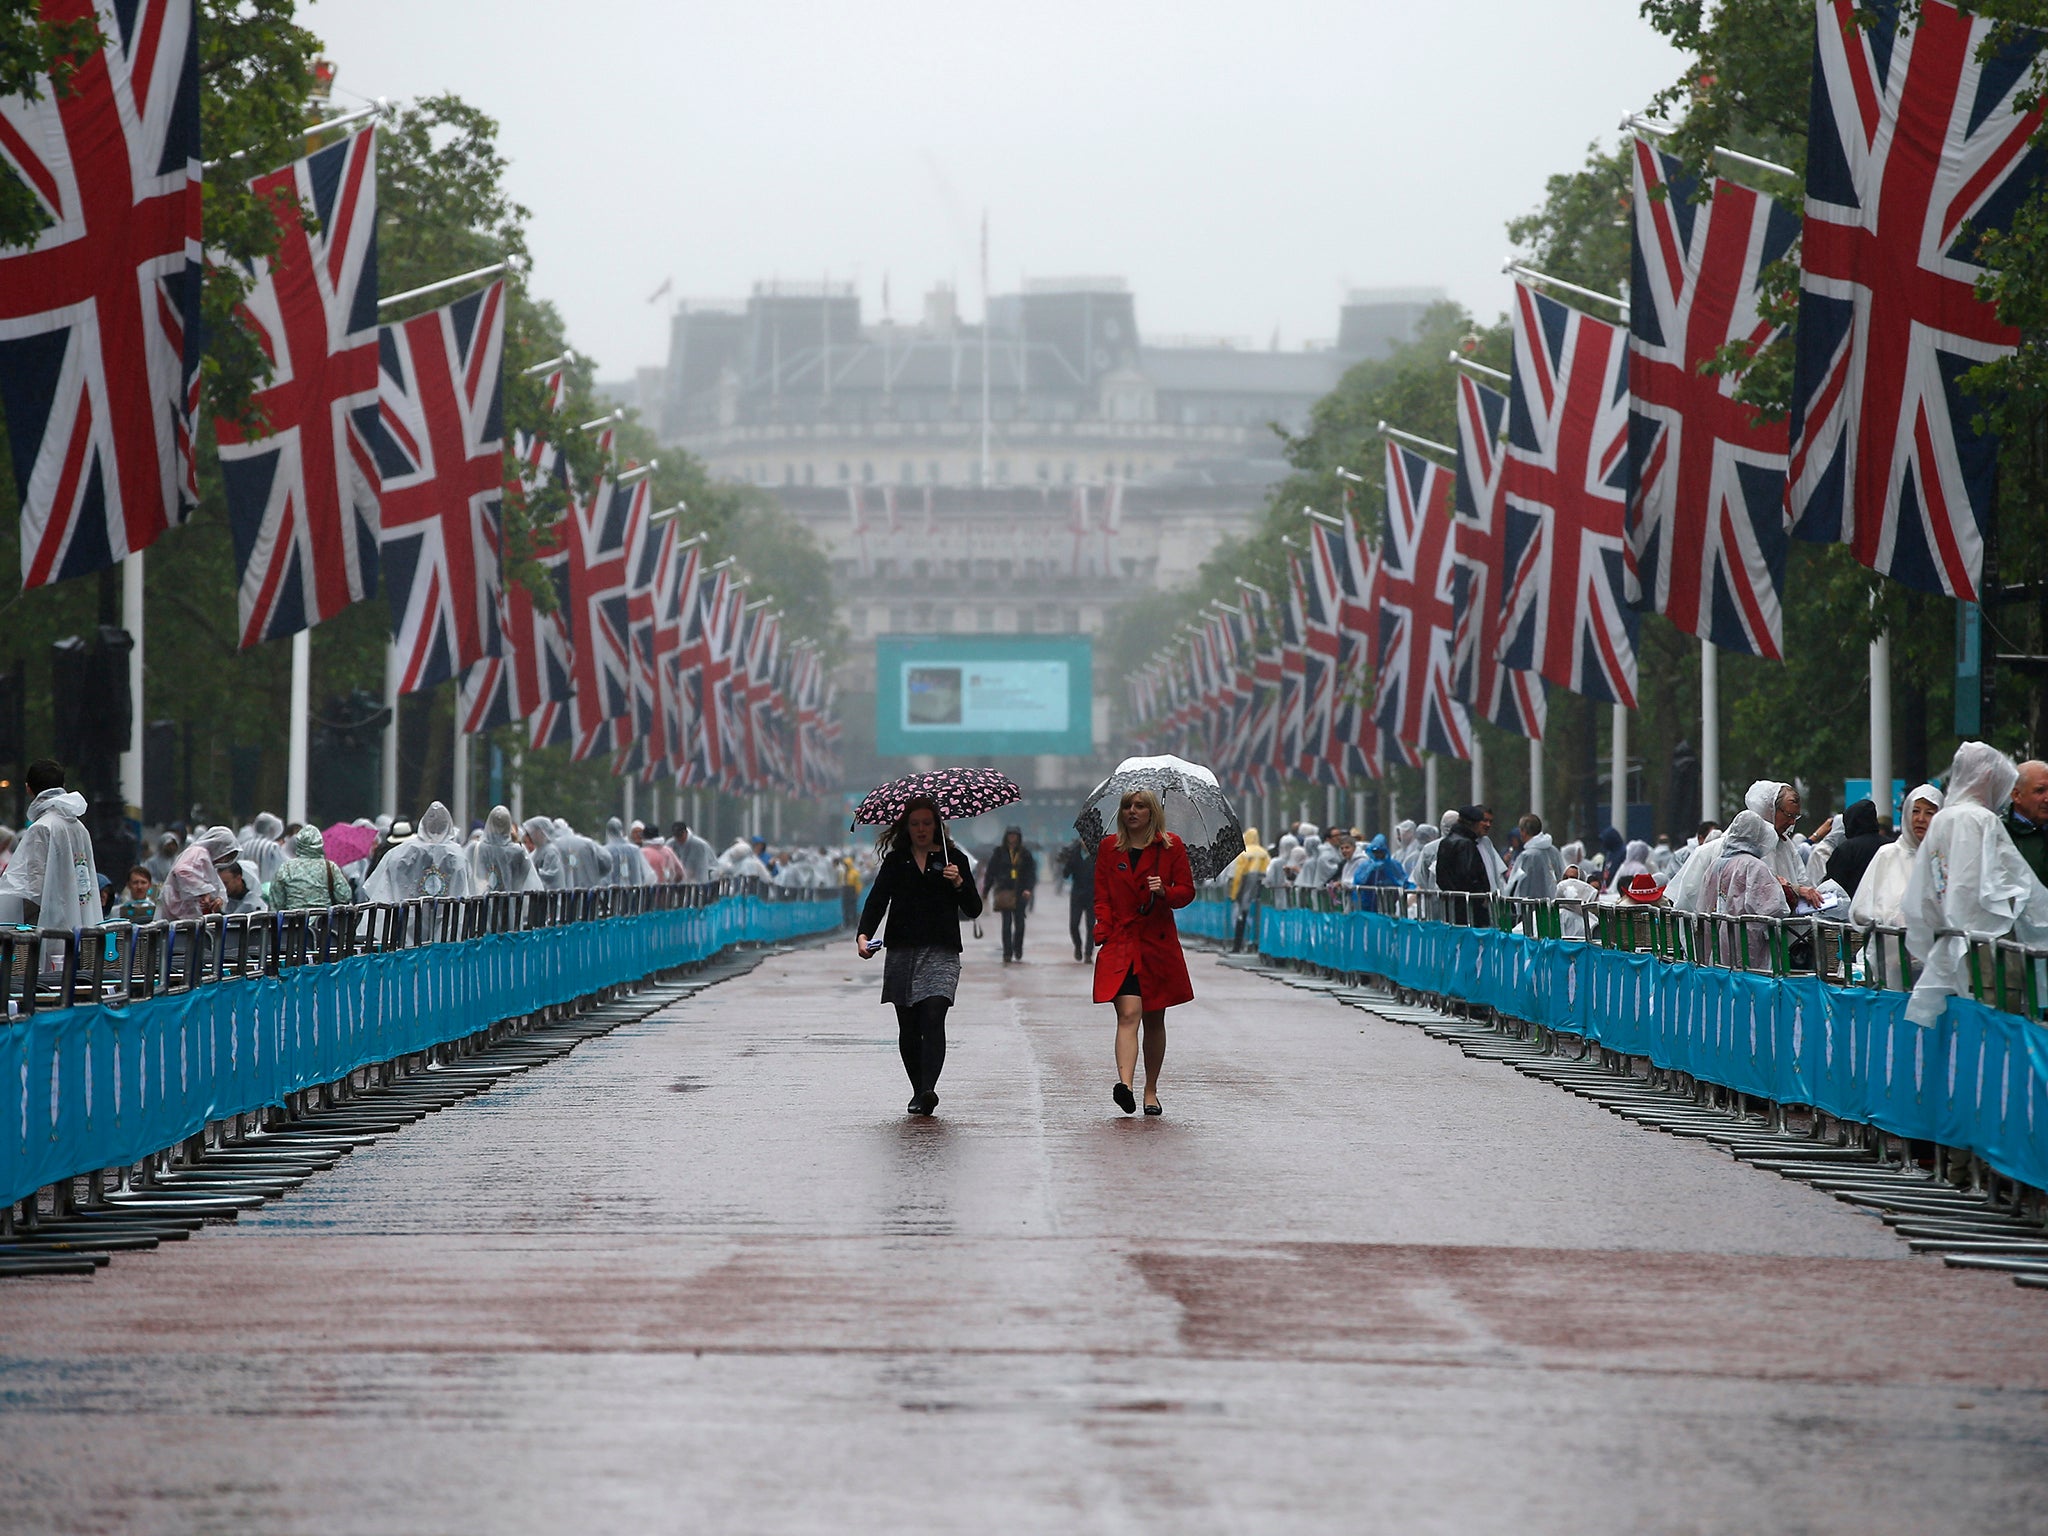 A street party to celebrate the Queen’s 90th birthday was hit by torrential downpours